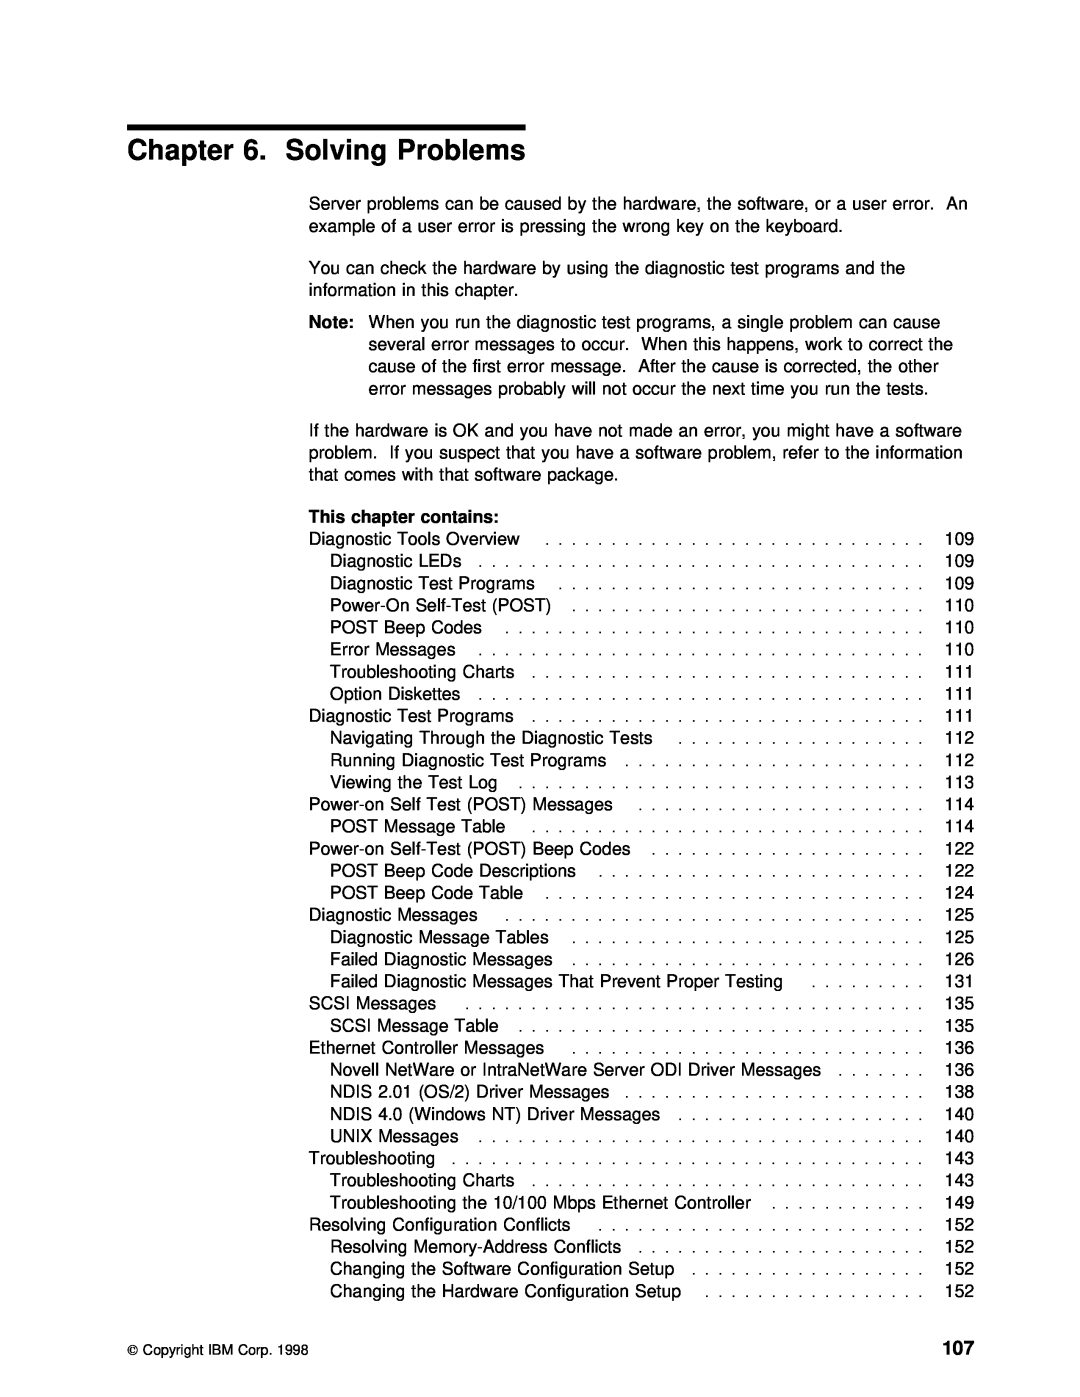 IBM 5000 manual Solving Problems, This chapter contains 